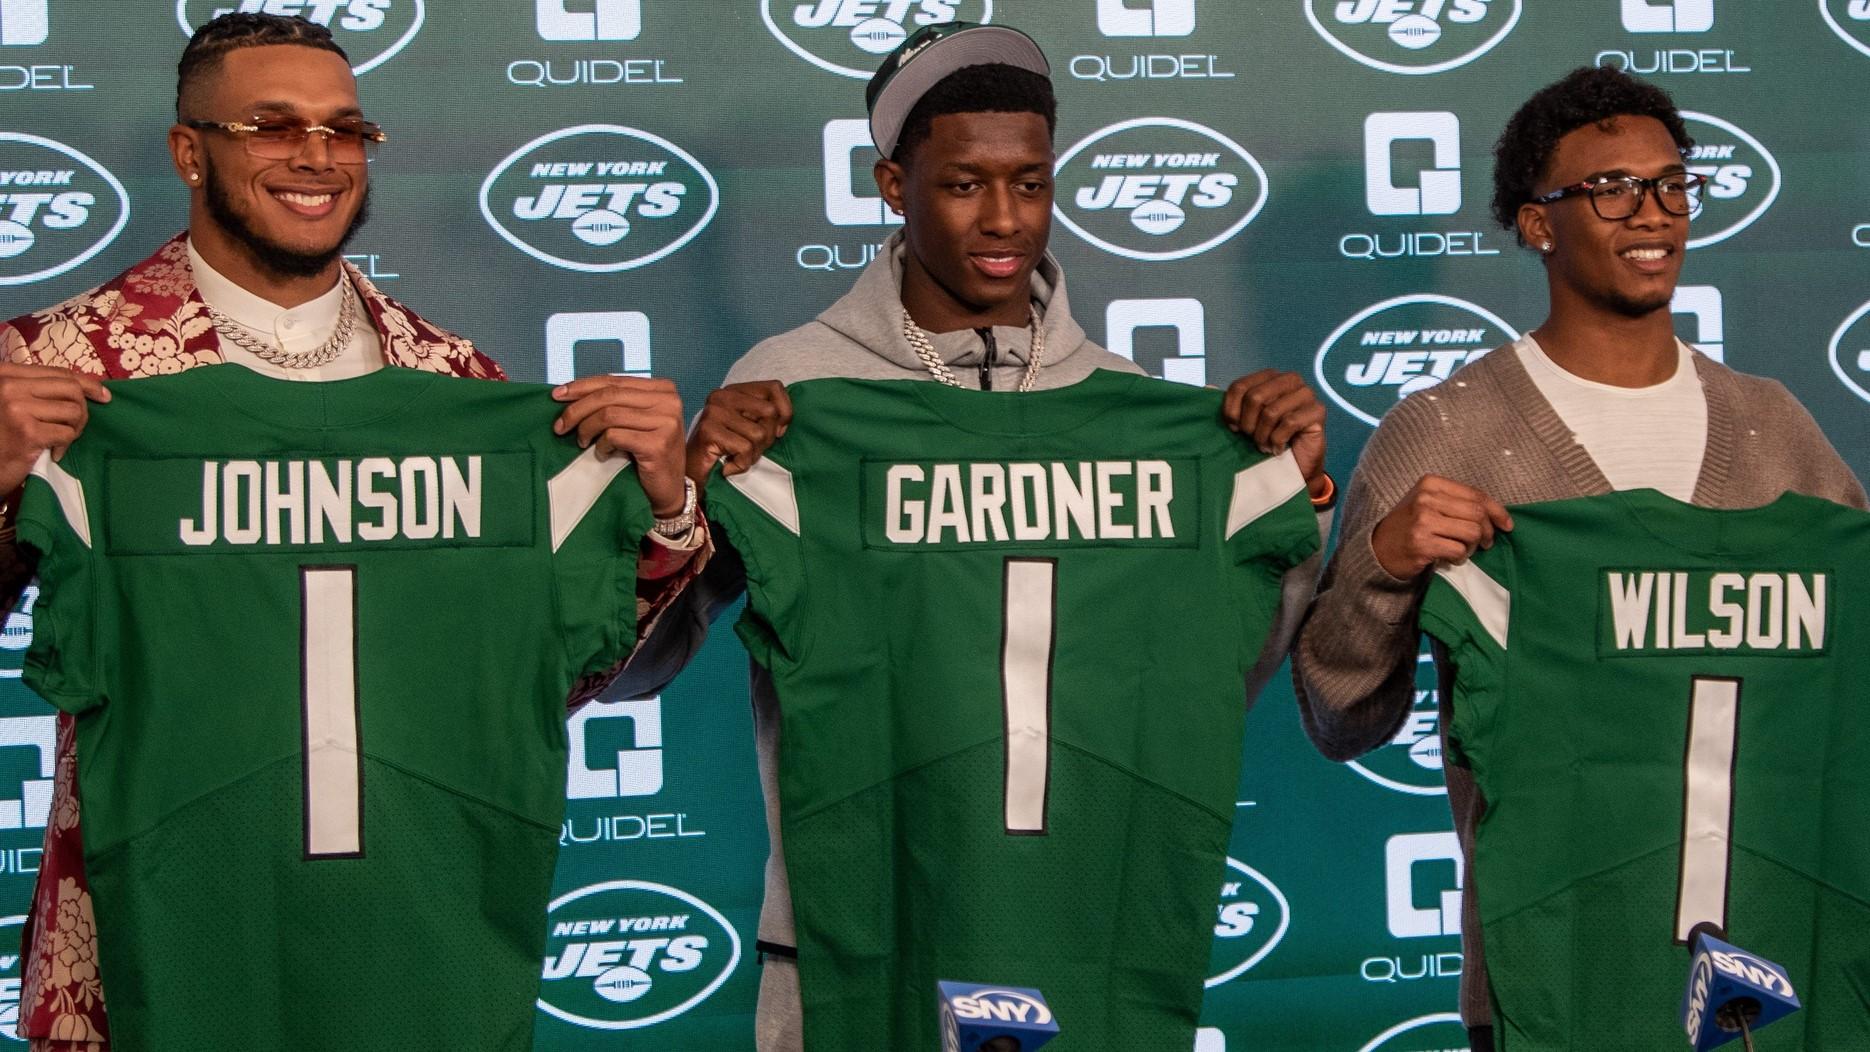 New York Jets introduce all three of their 2022 first-round NFL Draft picks. (From left) Jermaine Johnson, Ahmad \"Sauce\" Gardner, and Garrett Wilson attend a press conference at Atlantic Health Jets Training Center in Florham Park, NJ on Friday April 29, 2022. Jets 1st Round Draft Picks 2022 / Anne-Marie Caruso/NorthJersey.com / USA TODAY NETWORK